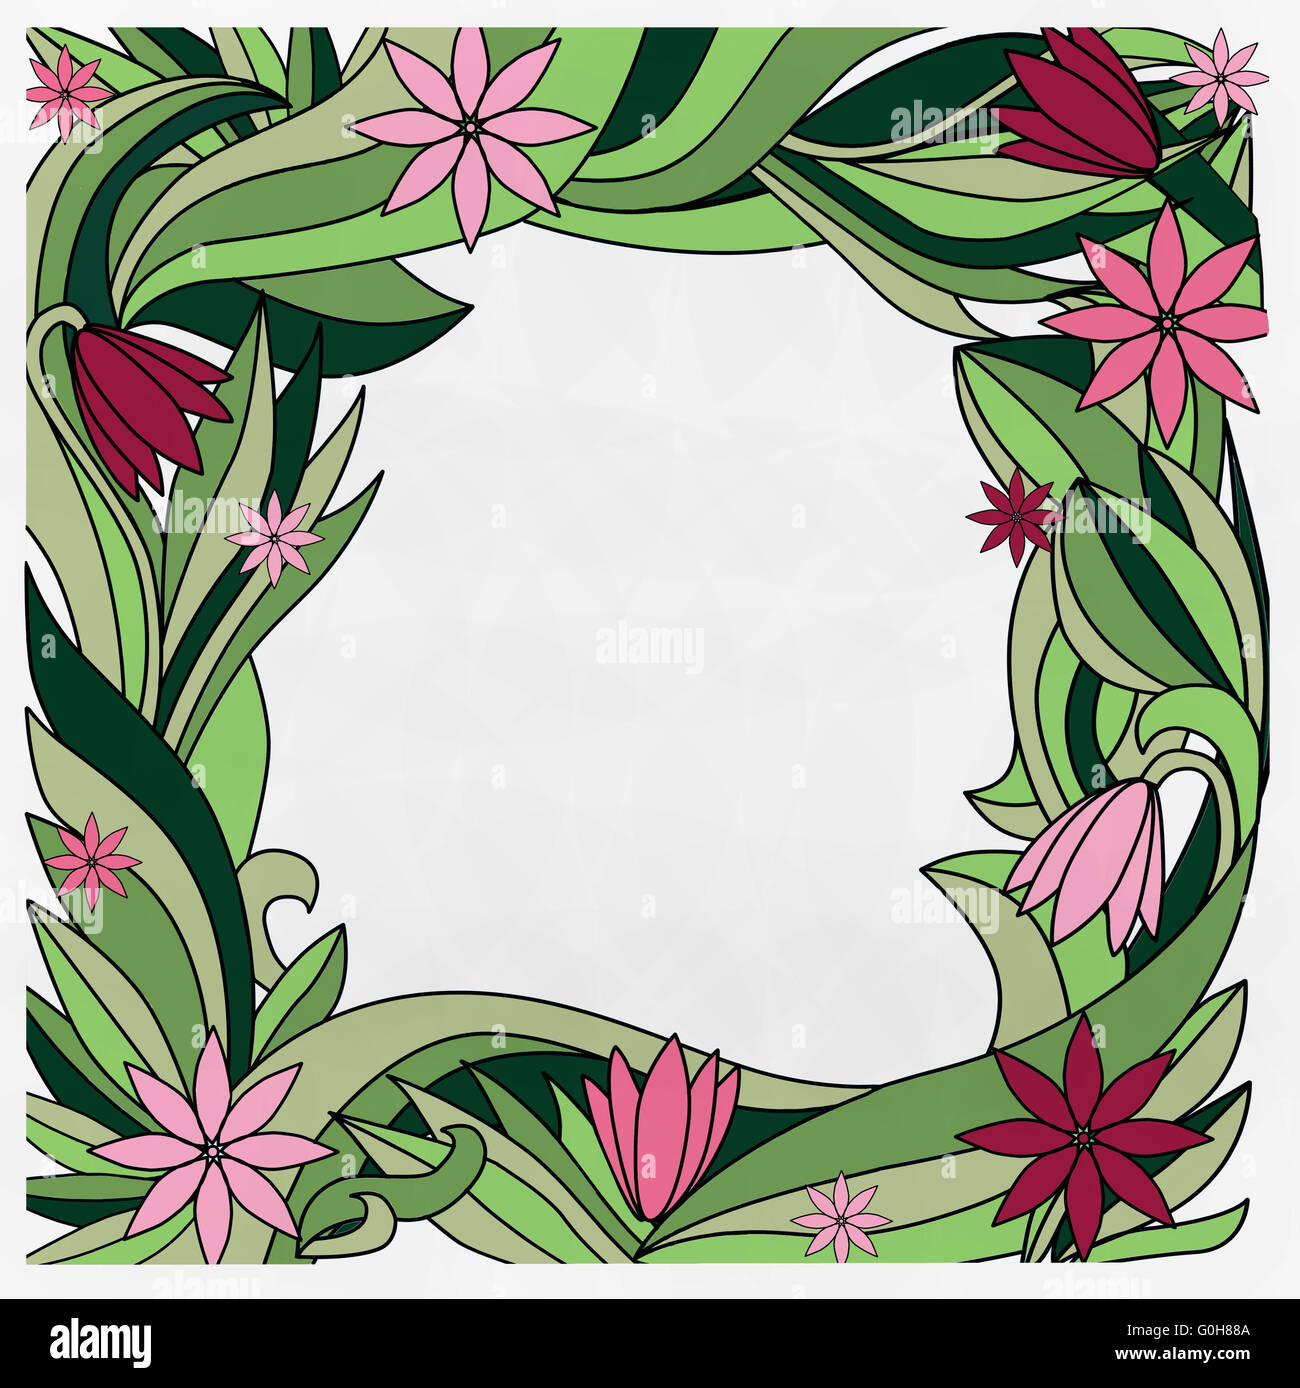 square frame with a pattern of pink flowers Stock Photo